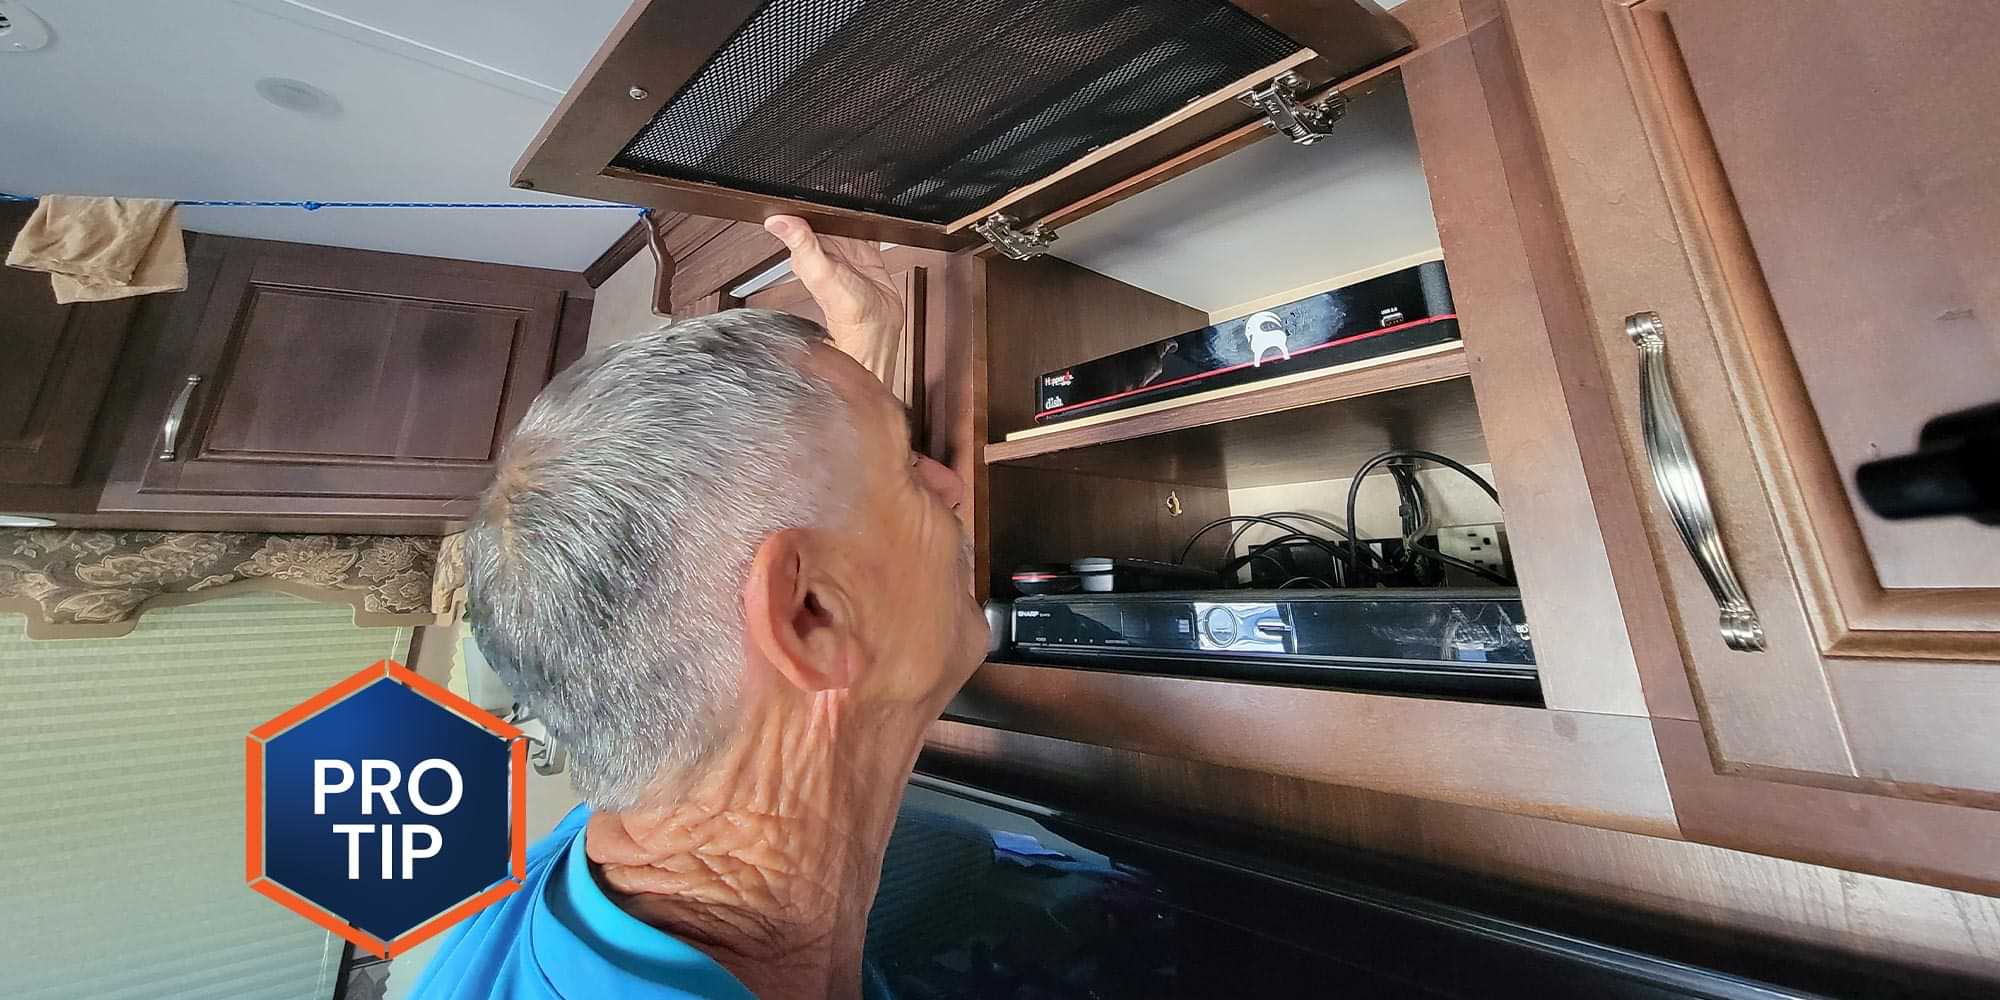 a man looks into an overhead compartment that holds electronic components